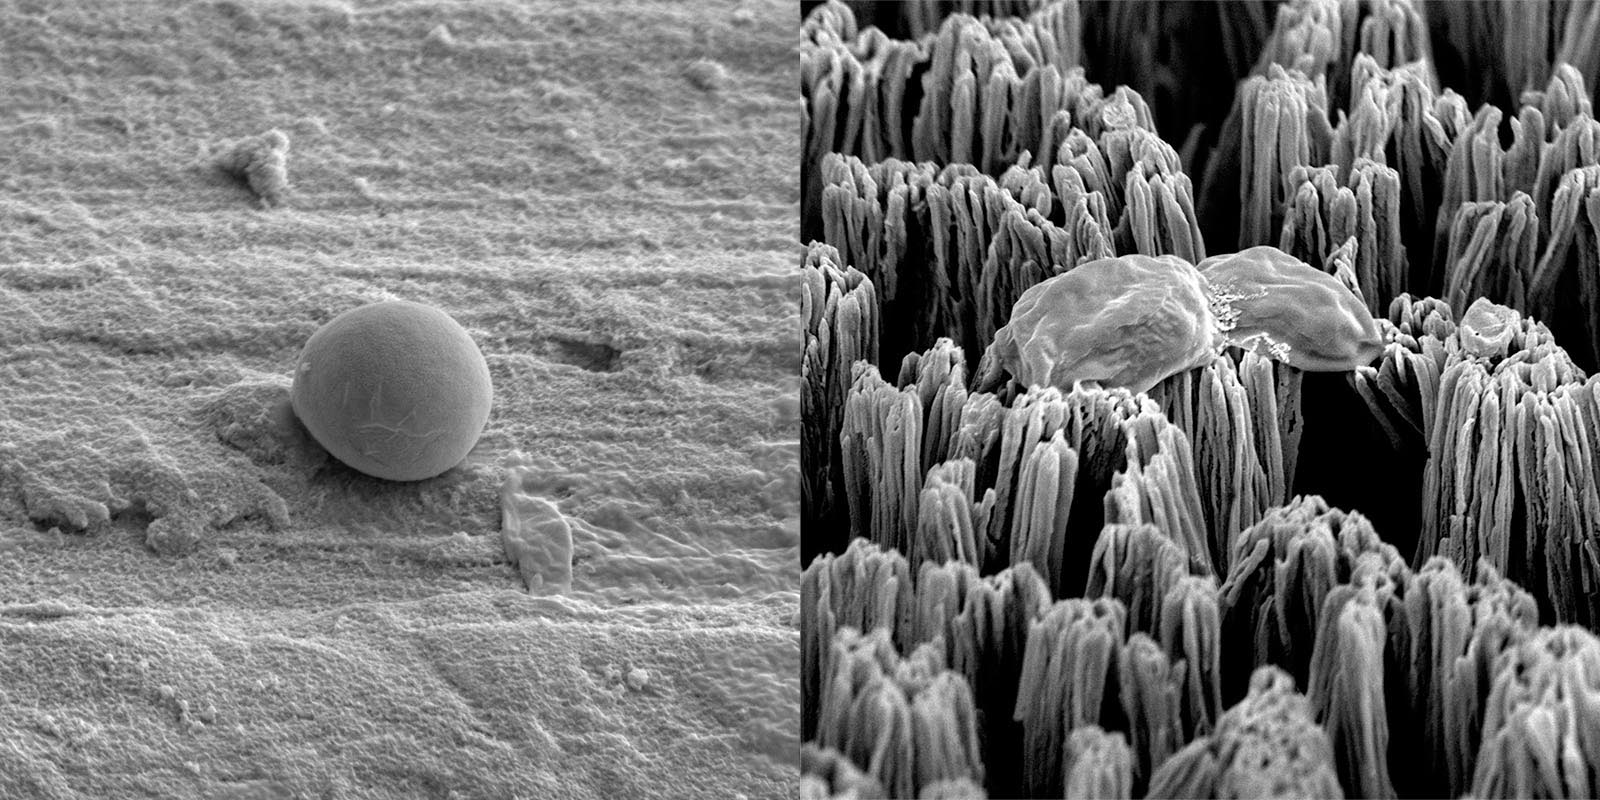 An intact Candida cell on polished titanium surface (left), and a ruptured Candida cell on the micro-spiked titanium surface (right)